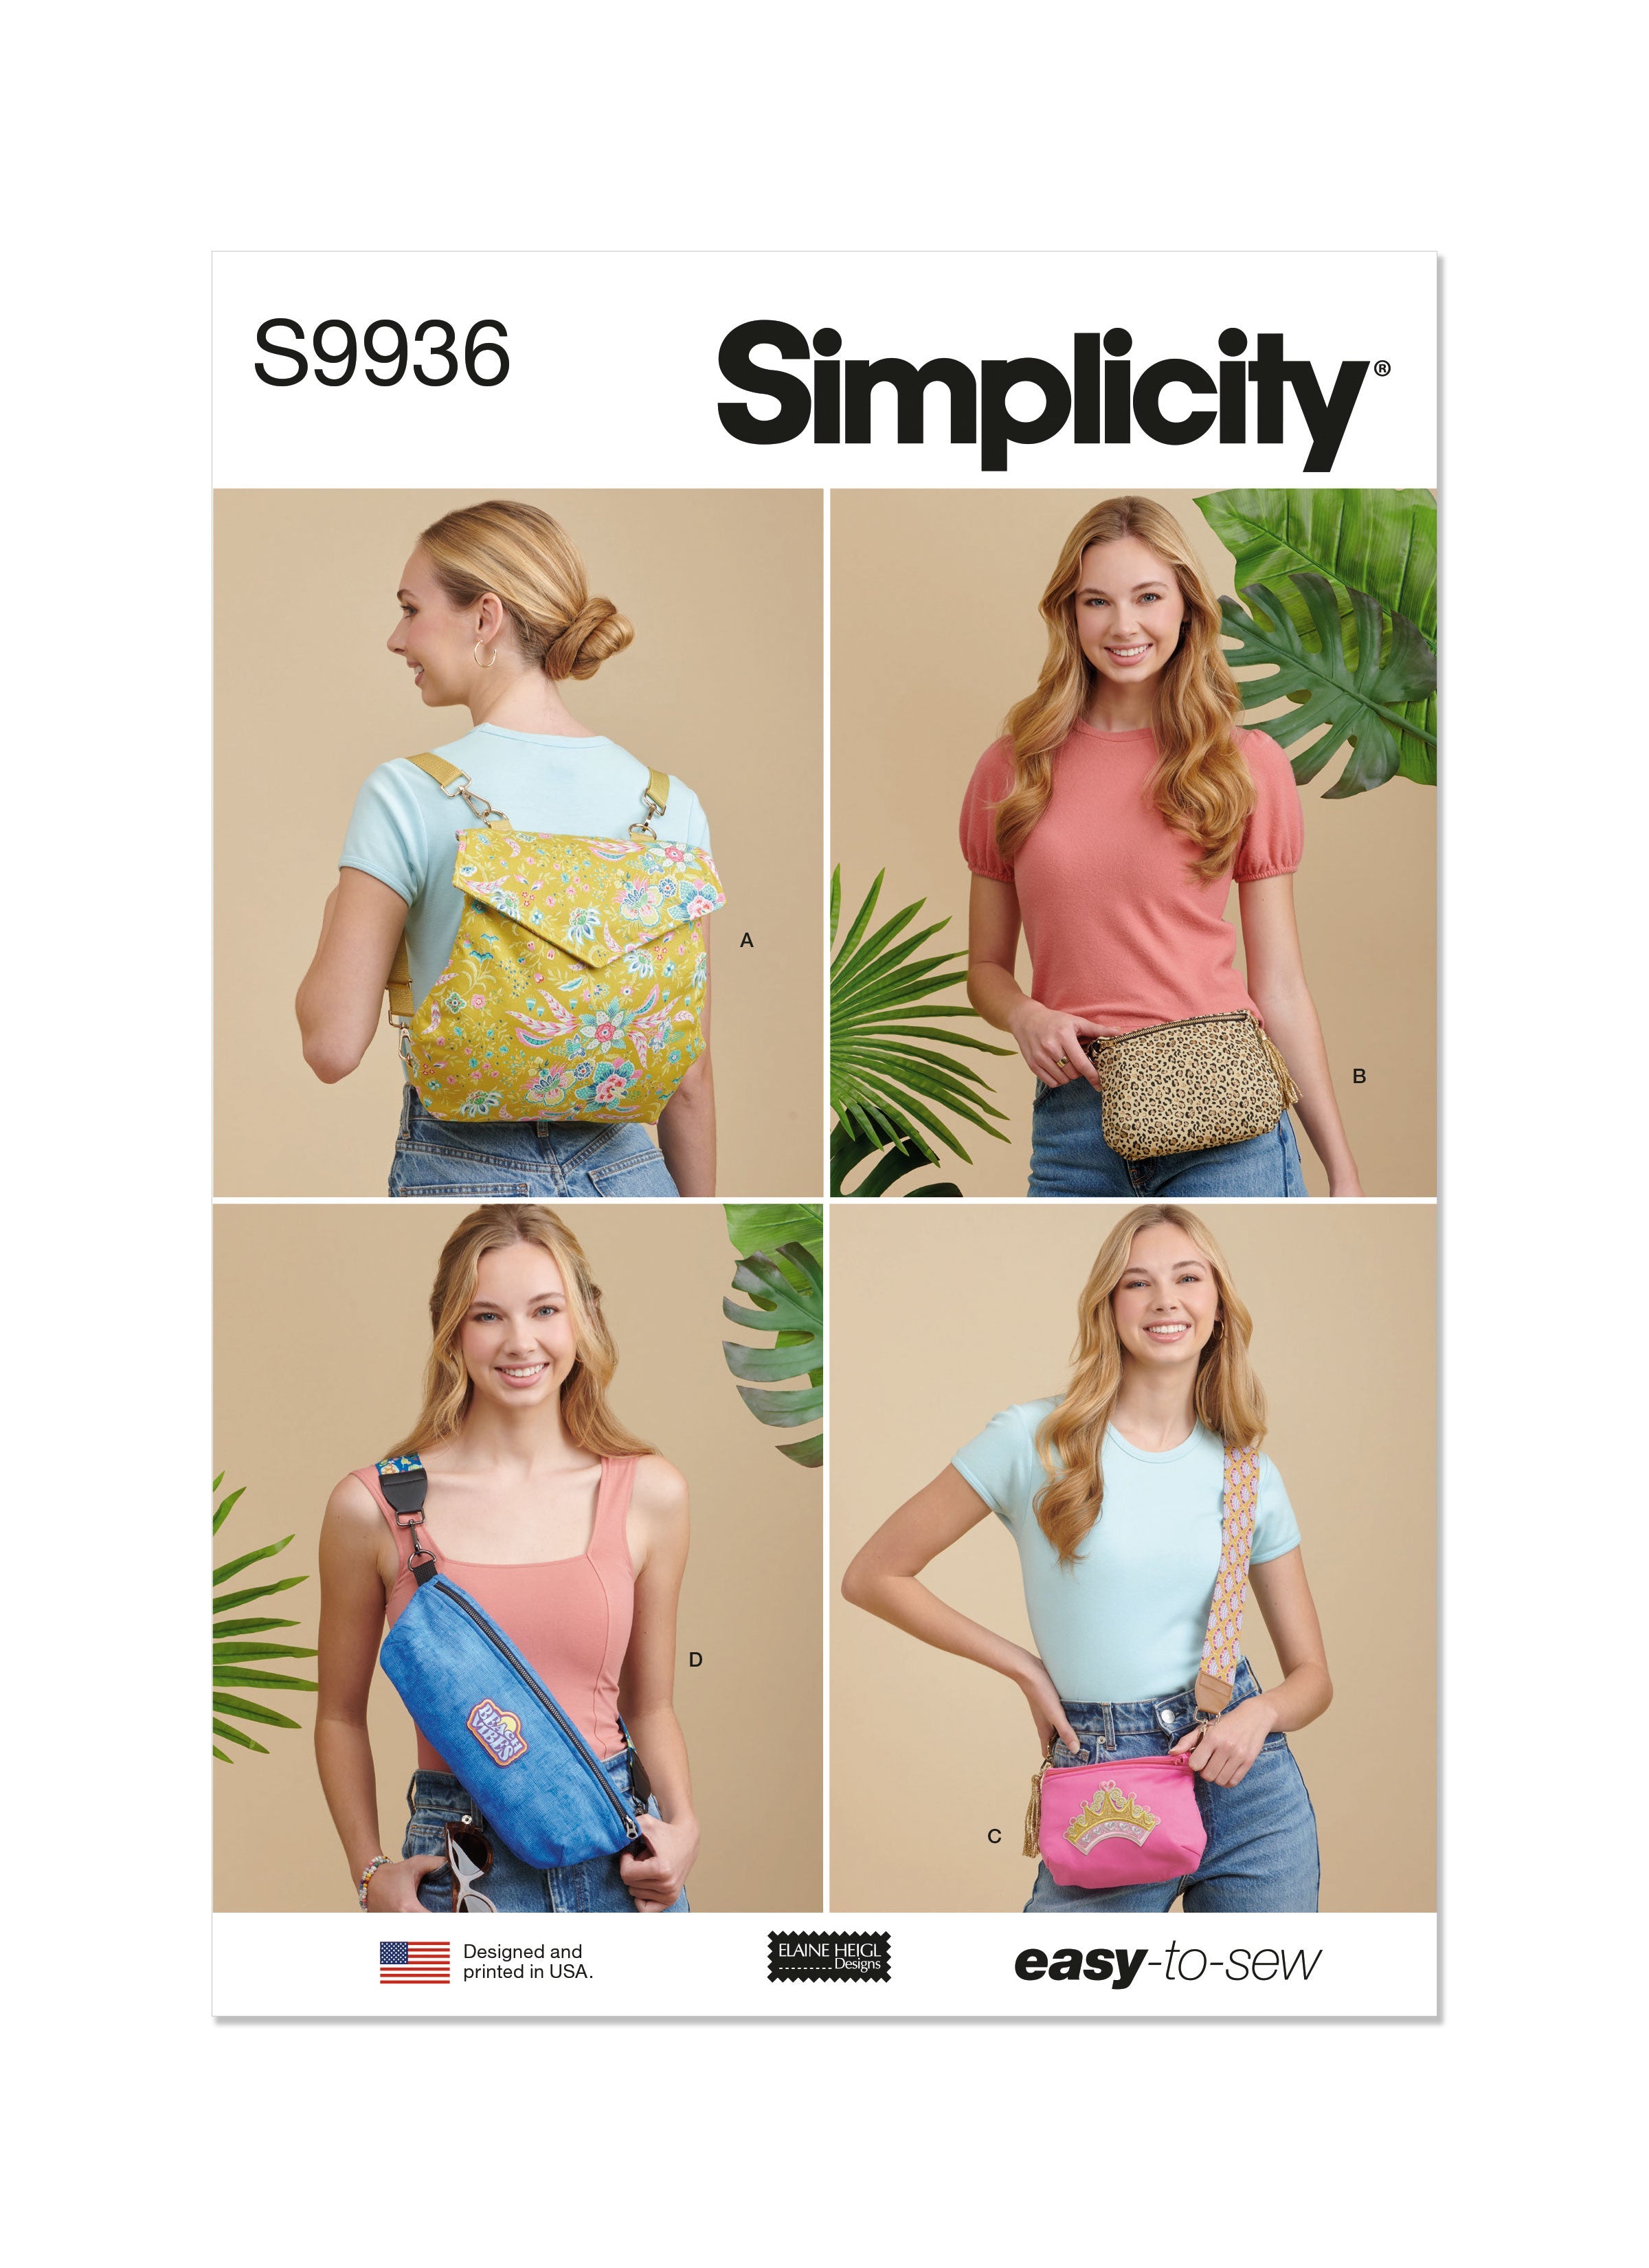 Simplicity Sewing Pattern 9936 Backpack, Bags and Purse by Elaine Heigl Designs from Jaycotts Sewing Supplies